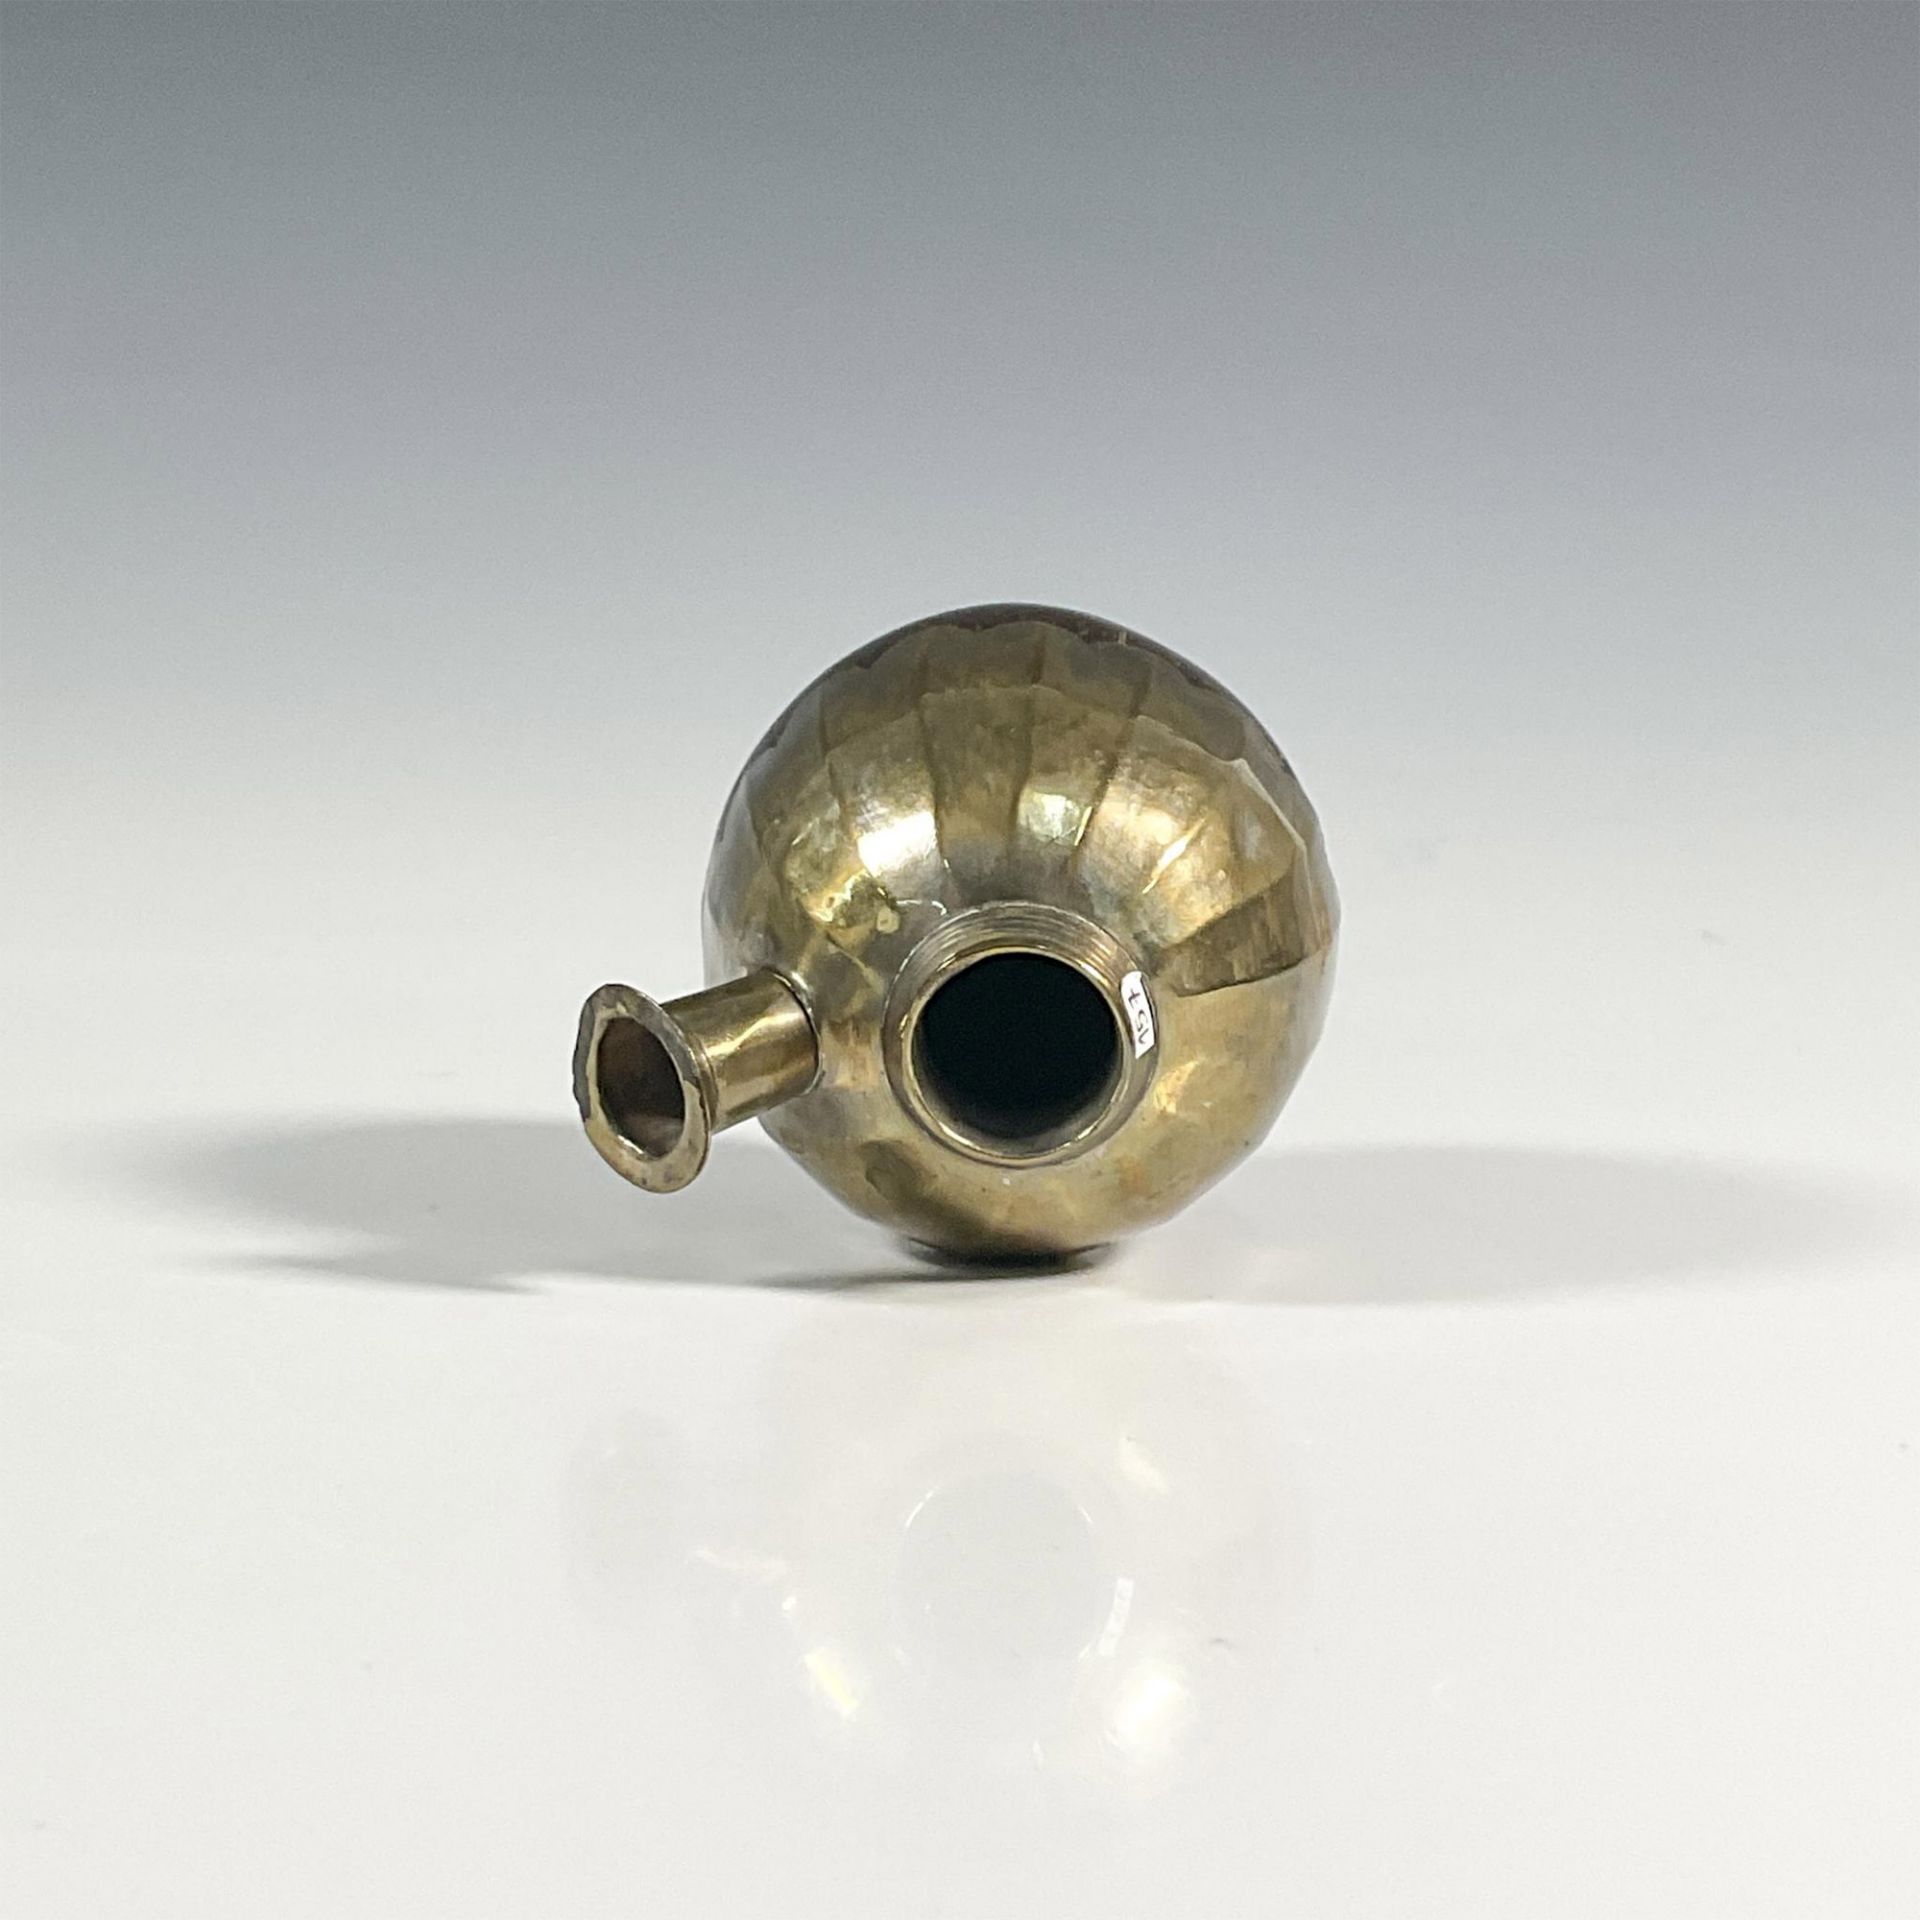 Coconut and Gold Metal Opium Pipe - Image 2 of 3